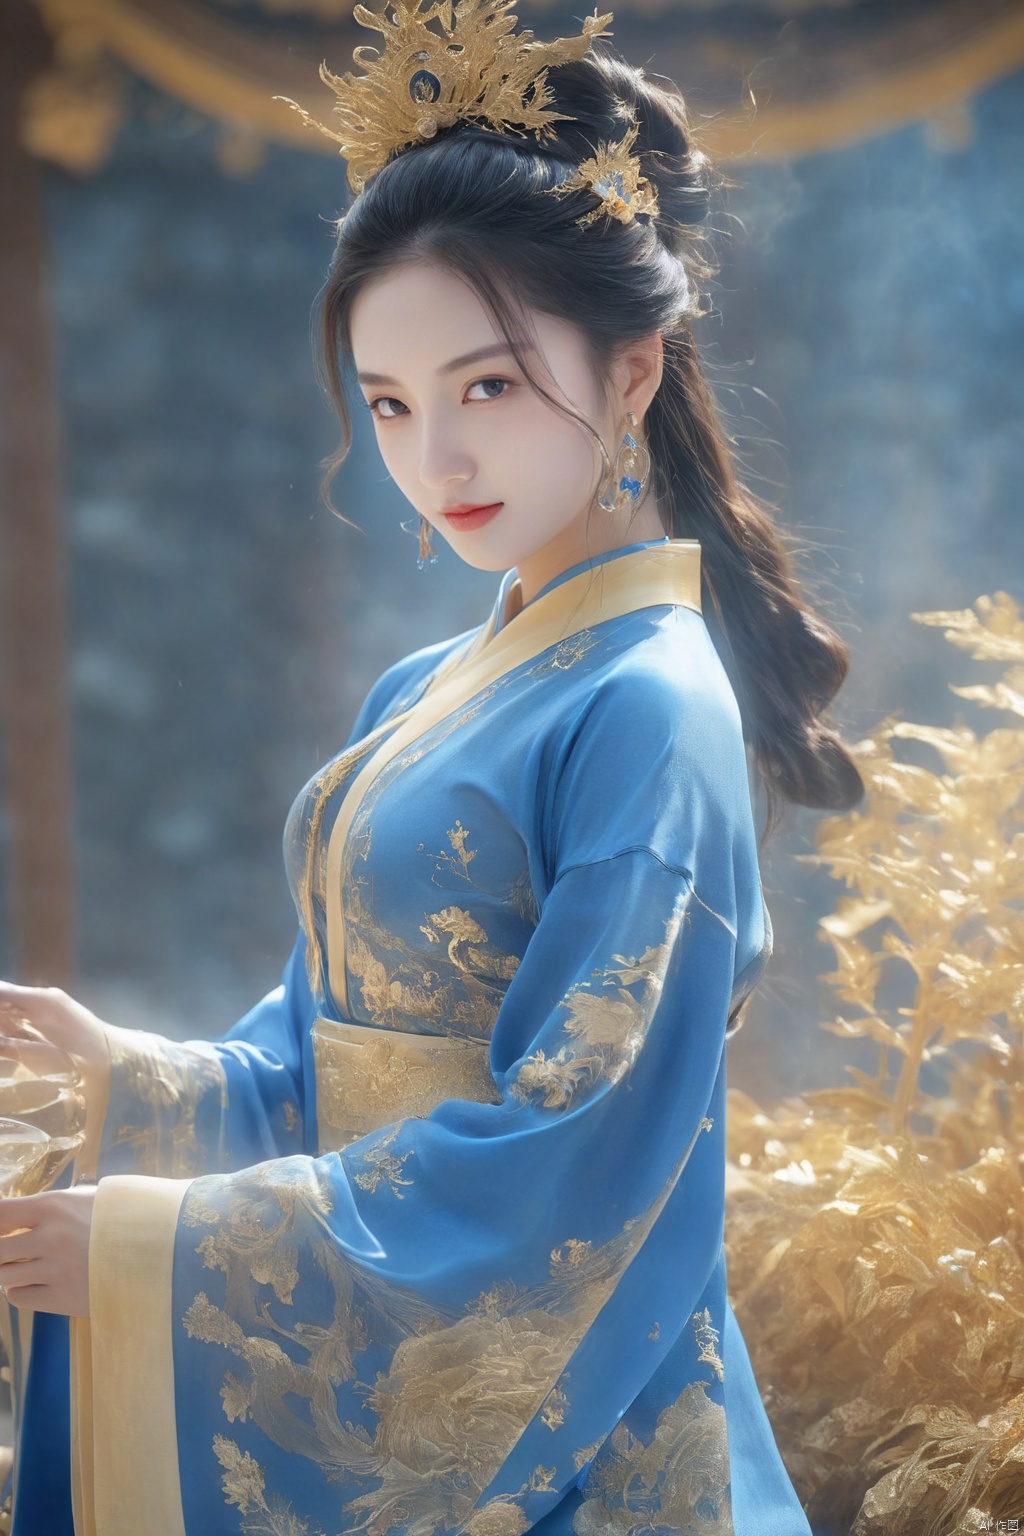  HUBG_Rococo_Style(loanword), 1girl, hanfu, Portrait of noble and graceful goddess, dressed in blue and gold, elaborate coiffure hairstyle, dark hair, decoration, 16K, UHD, HDR, Brilliant scene with bright lights, mist, numerous decorations, joyful atmosphere, light smile,HDR, IMAX, 8K resolutions, ultra resolutions, magnificent, best quality, masterpiece,cinematic scenes, cinematic shots, cinematic lighting, volumetric lighting, ultra-detailed, GUOFENG